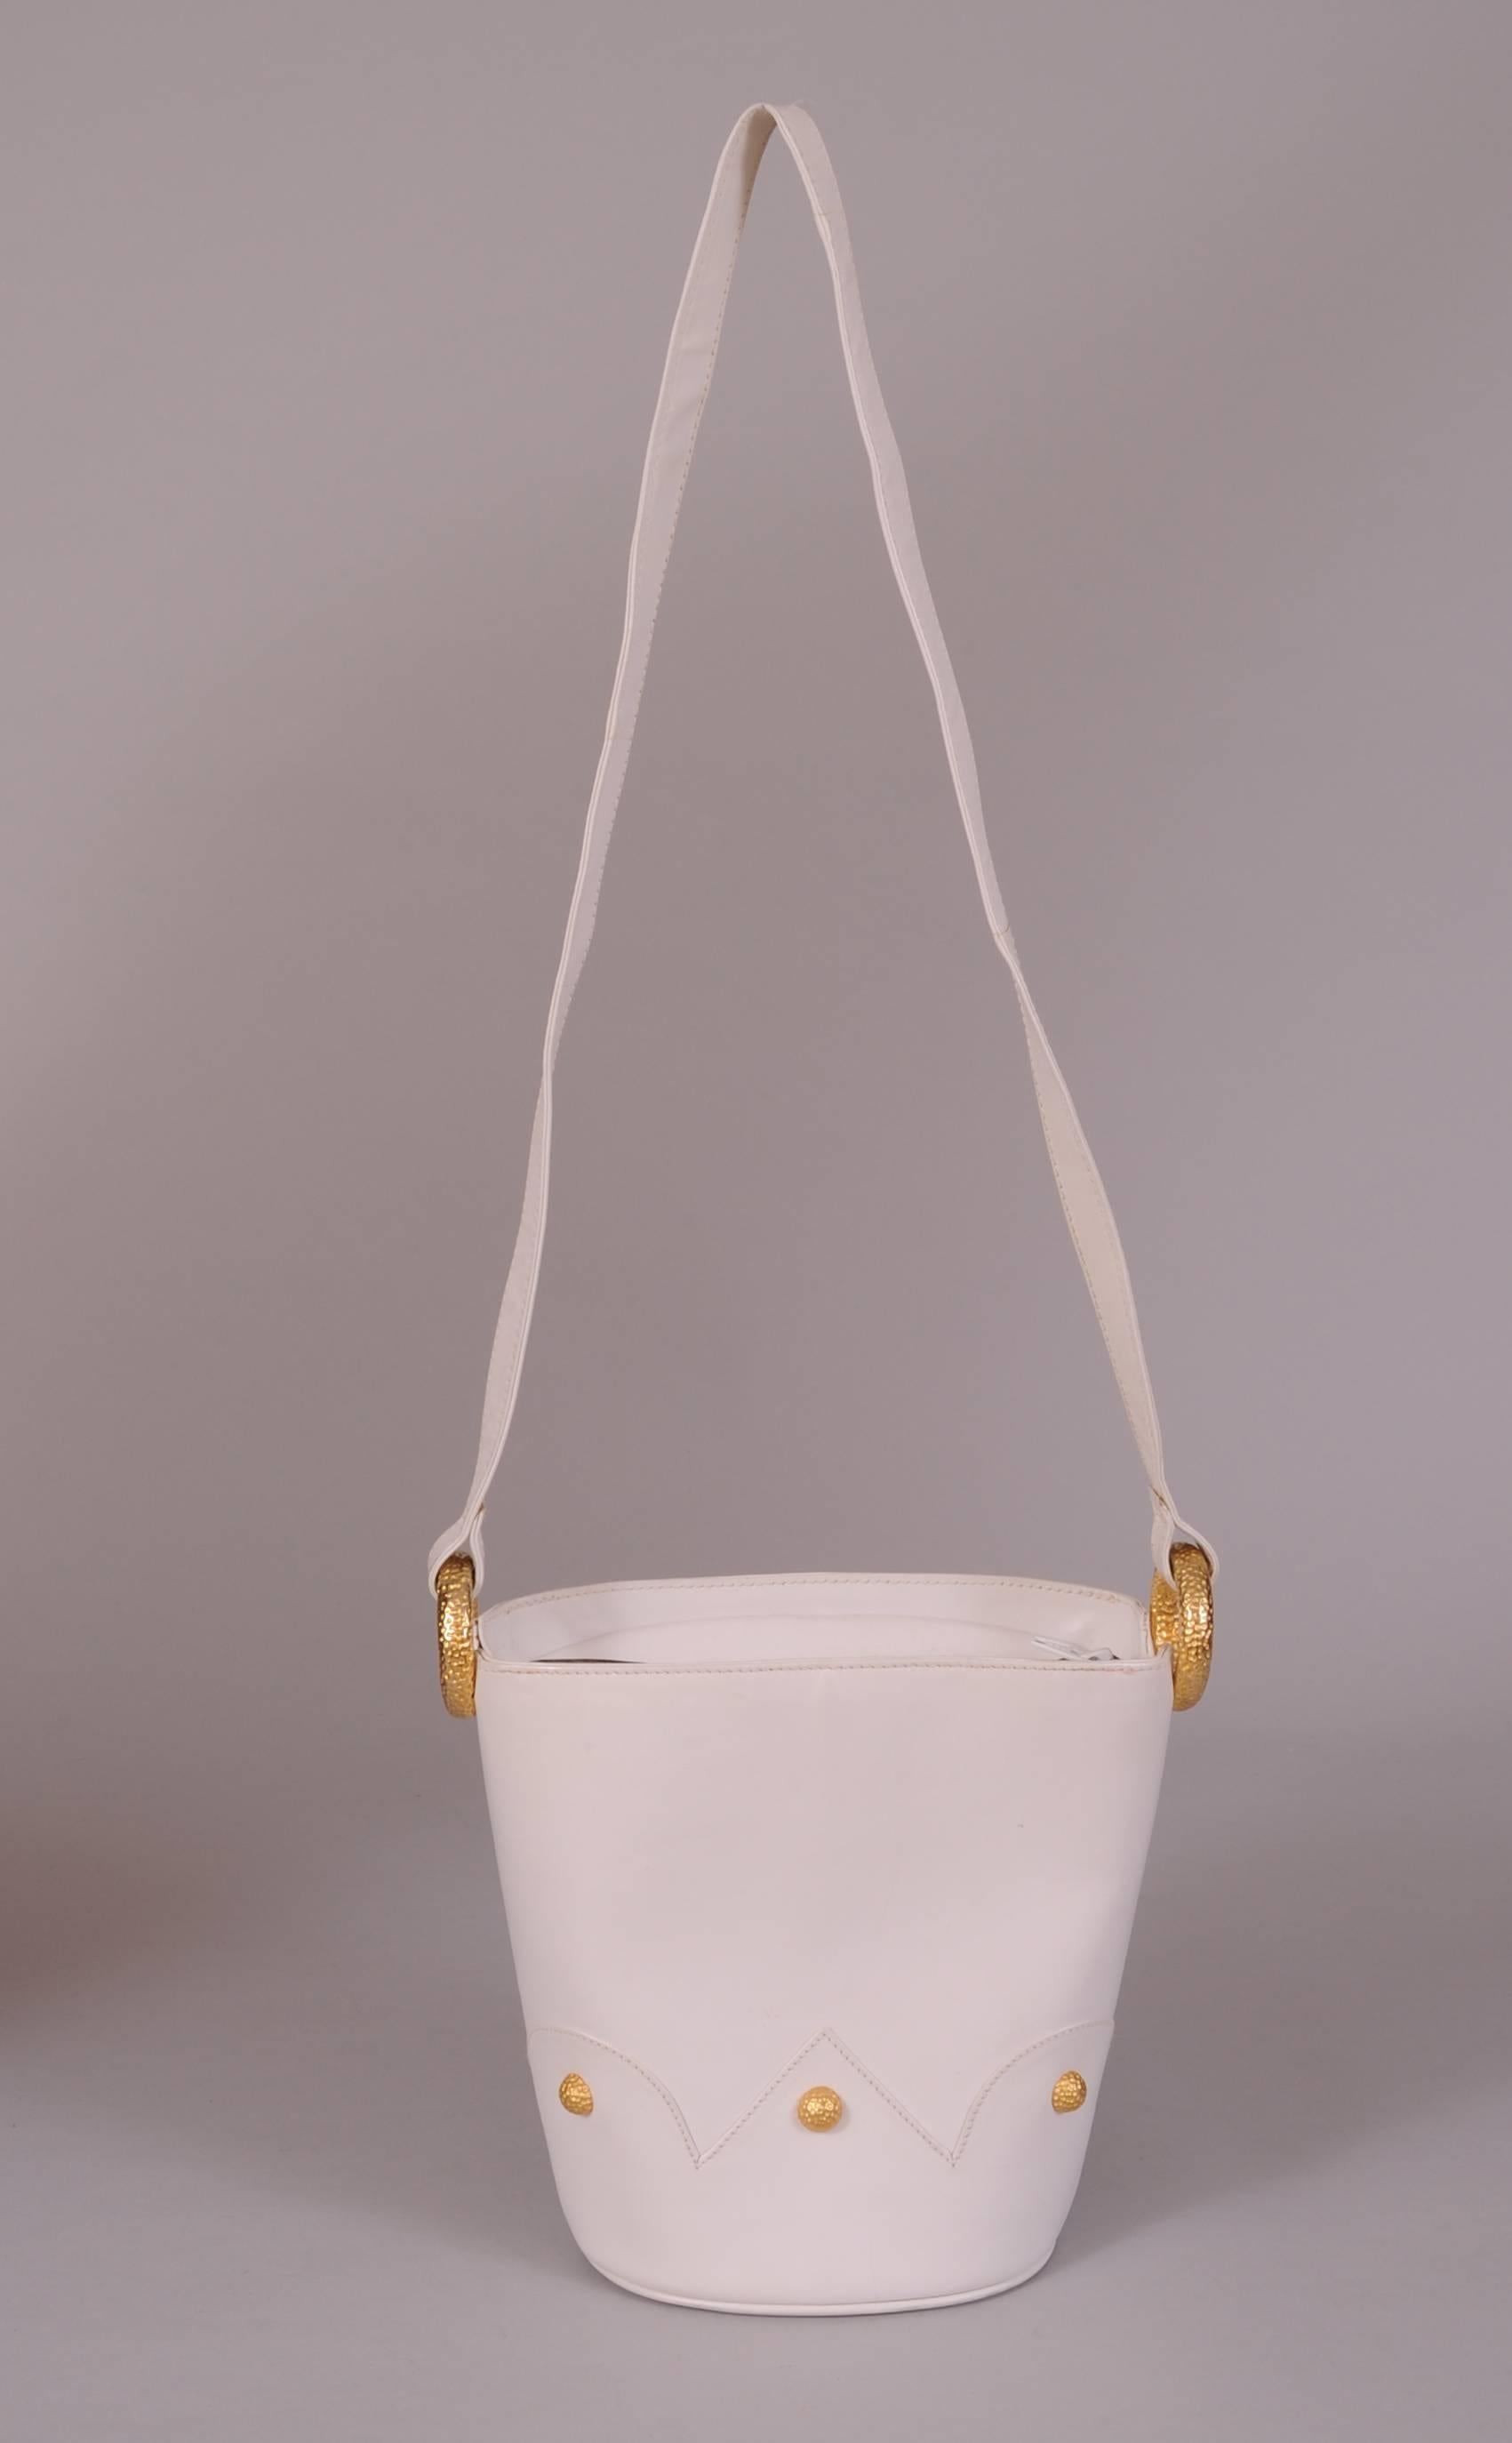 This charming white leather bucket bag from Paloma Picasso has a crown shaped applique all around the bag. It is studded with hammered gold toned
metal domes. These match the rings used to hold the shoulder strap. The bag has a zippered top opening,